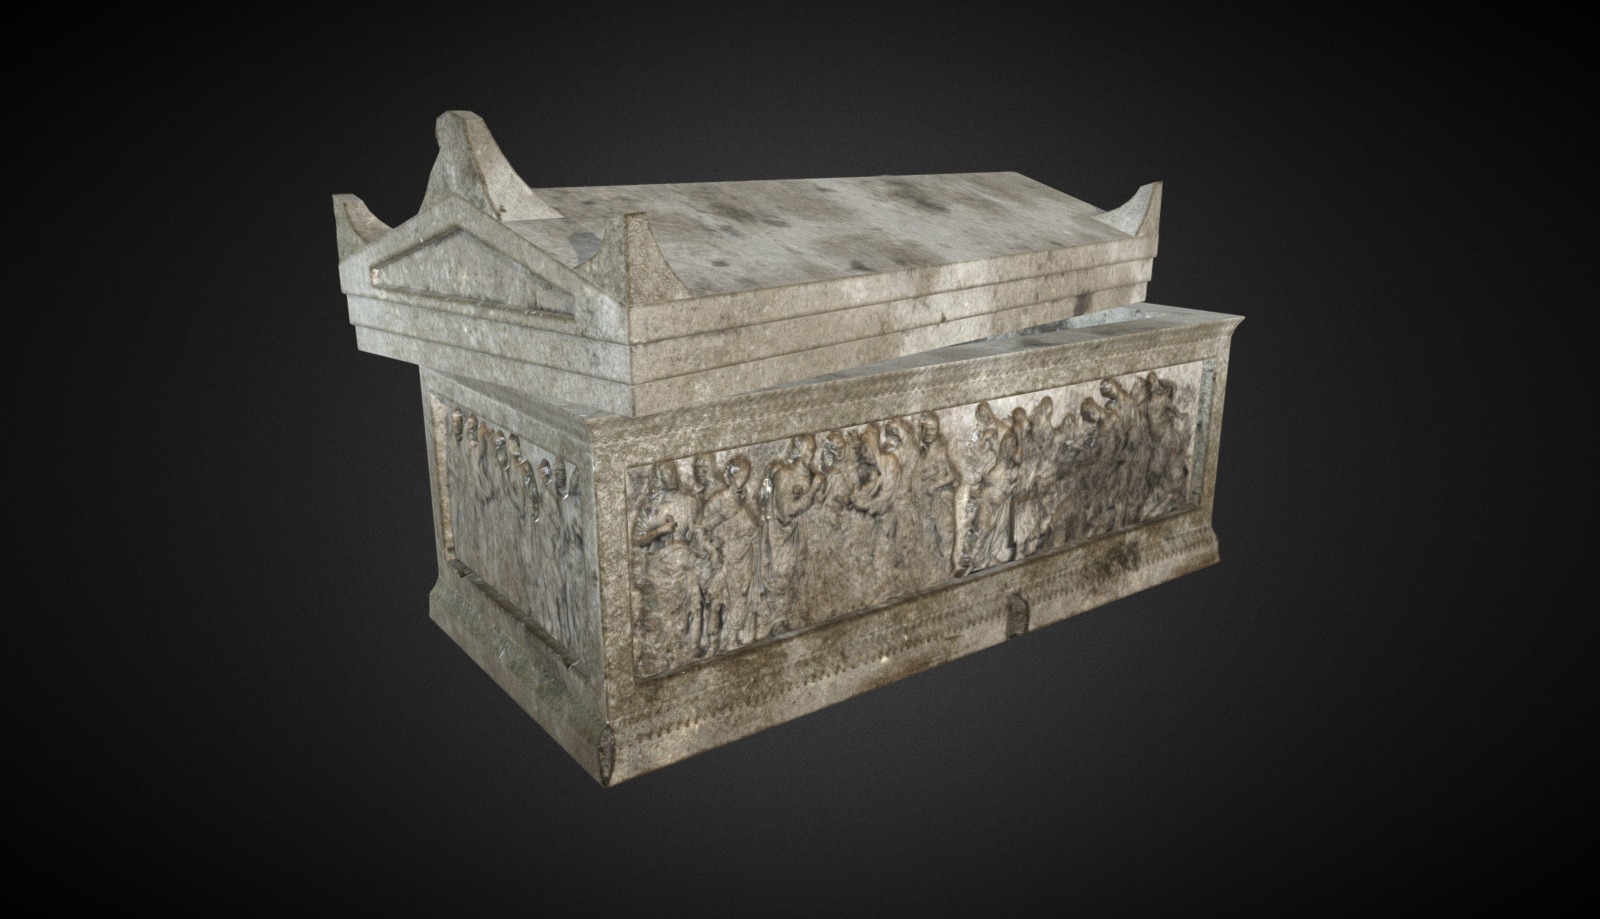 High-quality sarcophagus.


Collision mesh
Texture maps: 2048x2048 Normal, Albedo, Specular, LOD maps

sarcophagus 01:
LOD0 2328 points 3690 triangles
LOD1 128 points 216 triangles

There are 2 levels of detail for each model. It allows to optimise gaming graphics, and depending on the load range of drawing the appropriate model.

Soon in AssetStore - Sarcophagus 01 - 3D model by luchin192 3d model